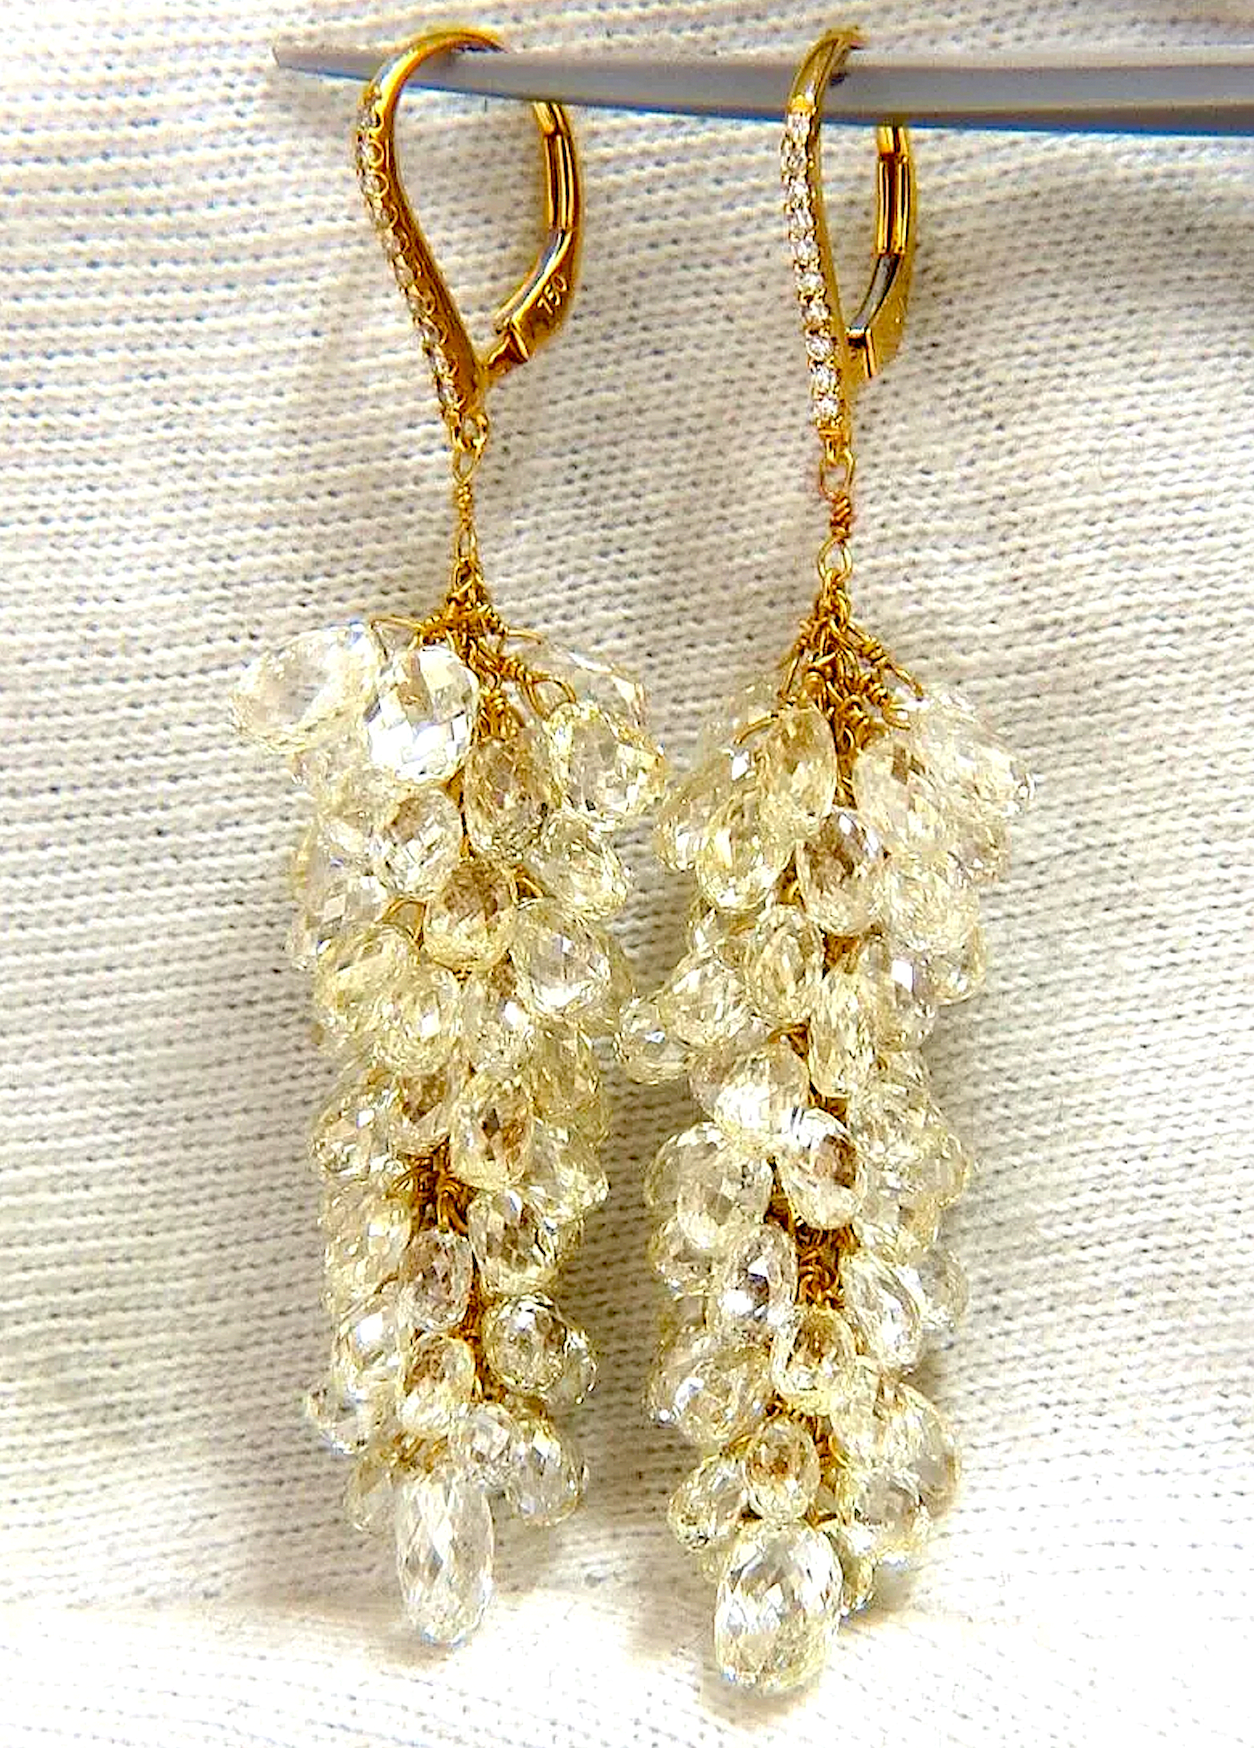 Pair of floating grapevine-style dangle earrings set with 50 carats’ worth of diamonds, est. $36,000-$43,000